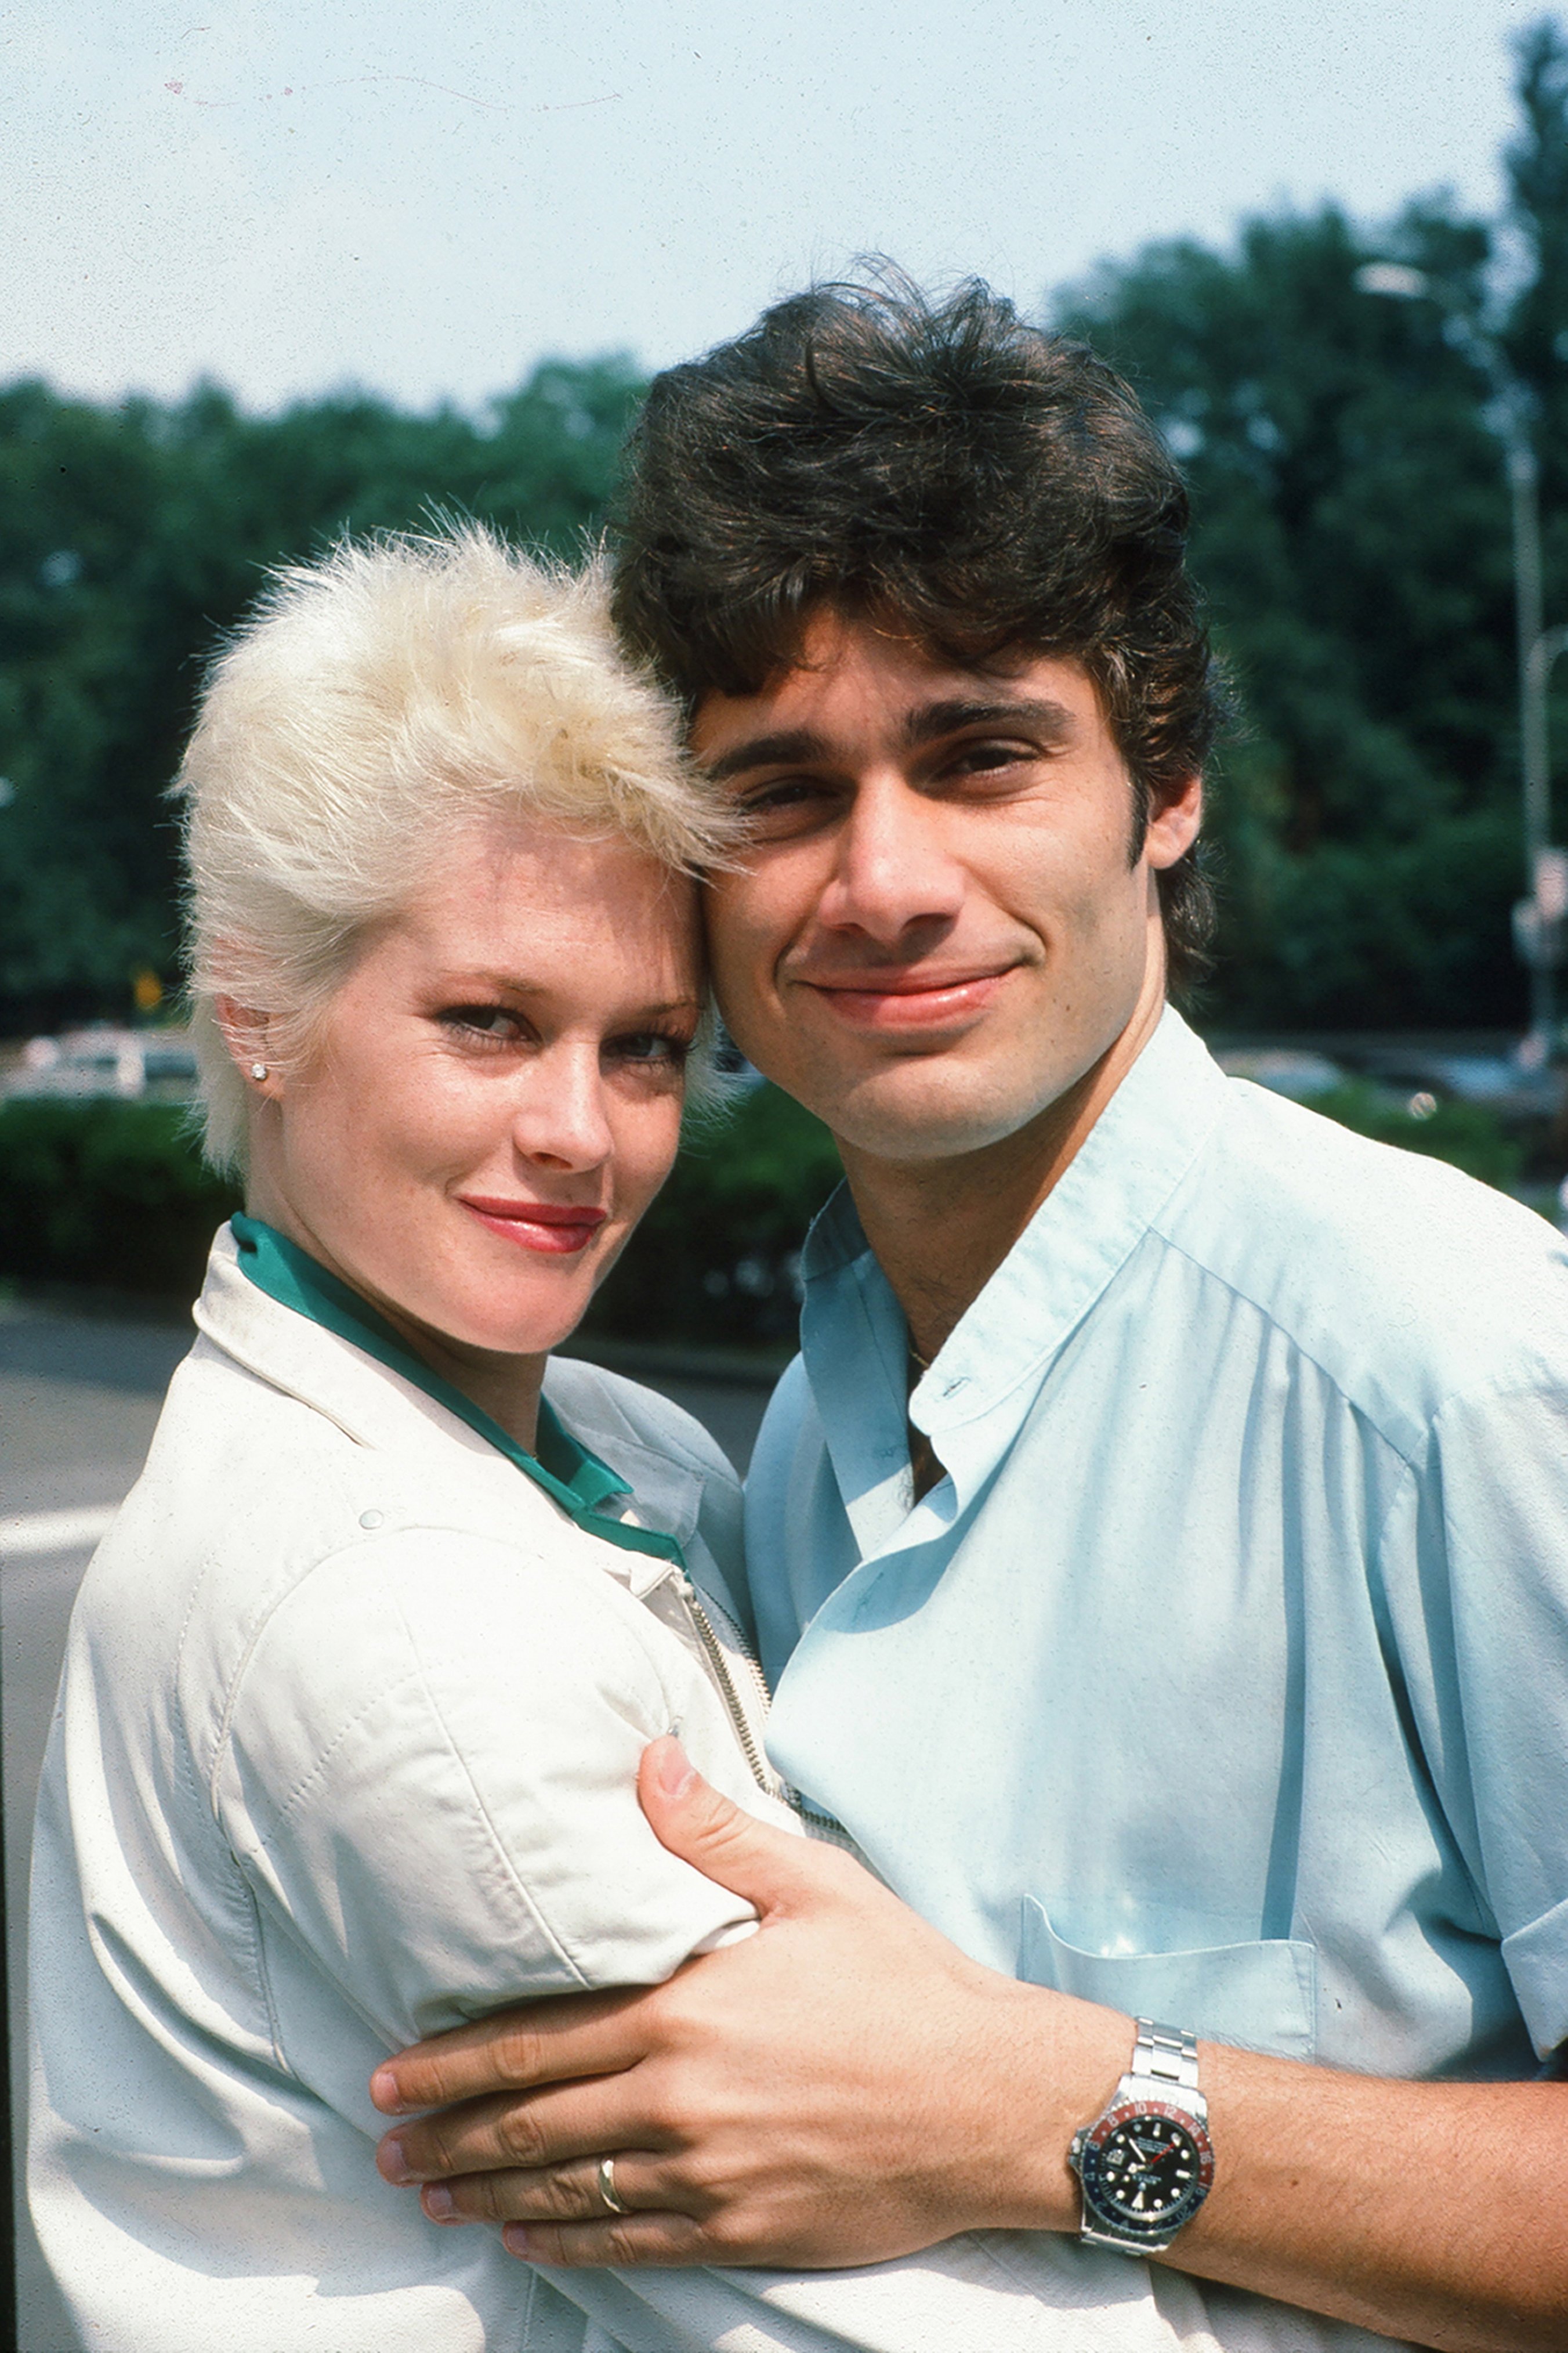 Melanie Griffith captured with her husband, fellow actor Steven Bauer in 1984 in New York. | Source: Getty Images